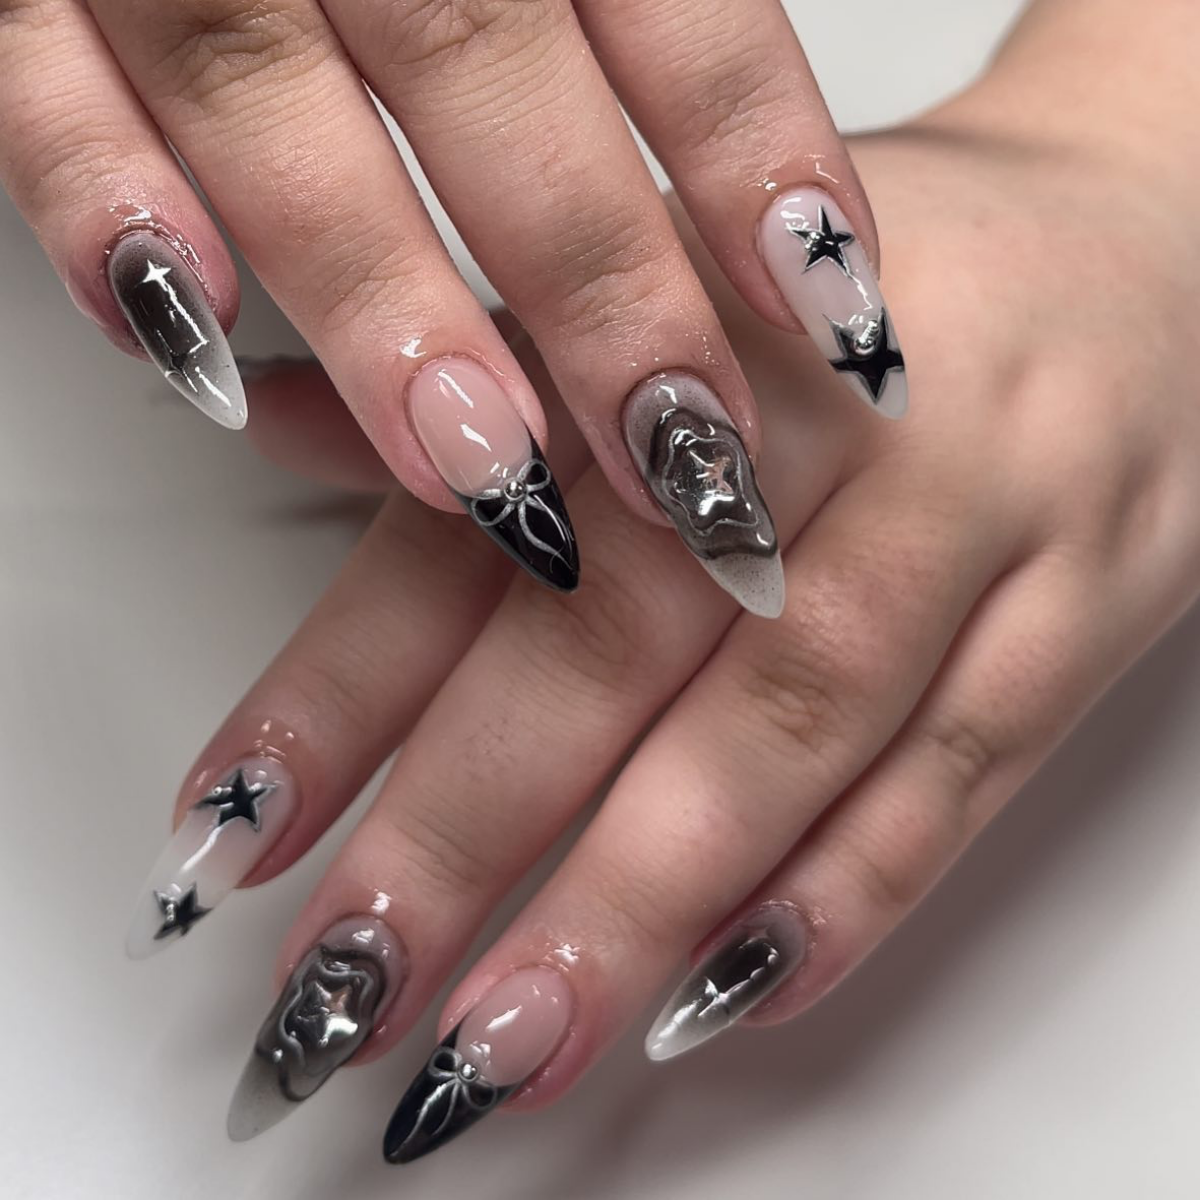 15 Edgy Black Nail Designs For A Daring And Dramatic Statement